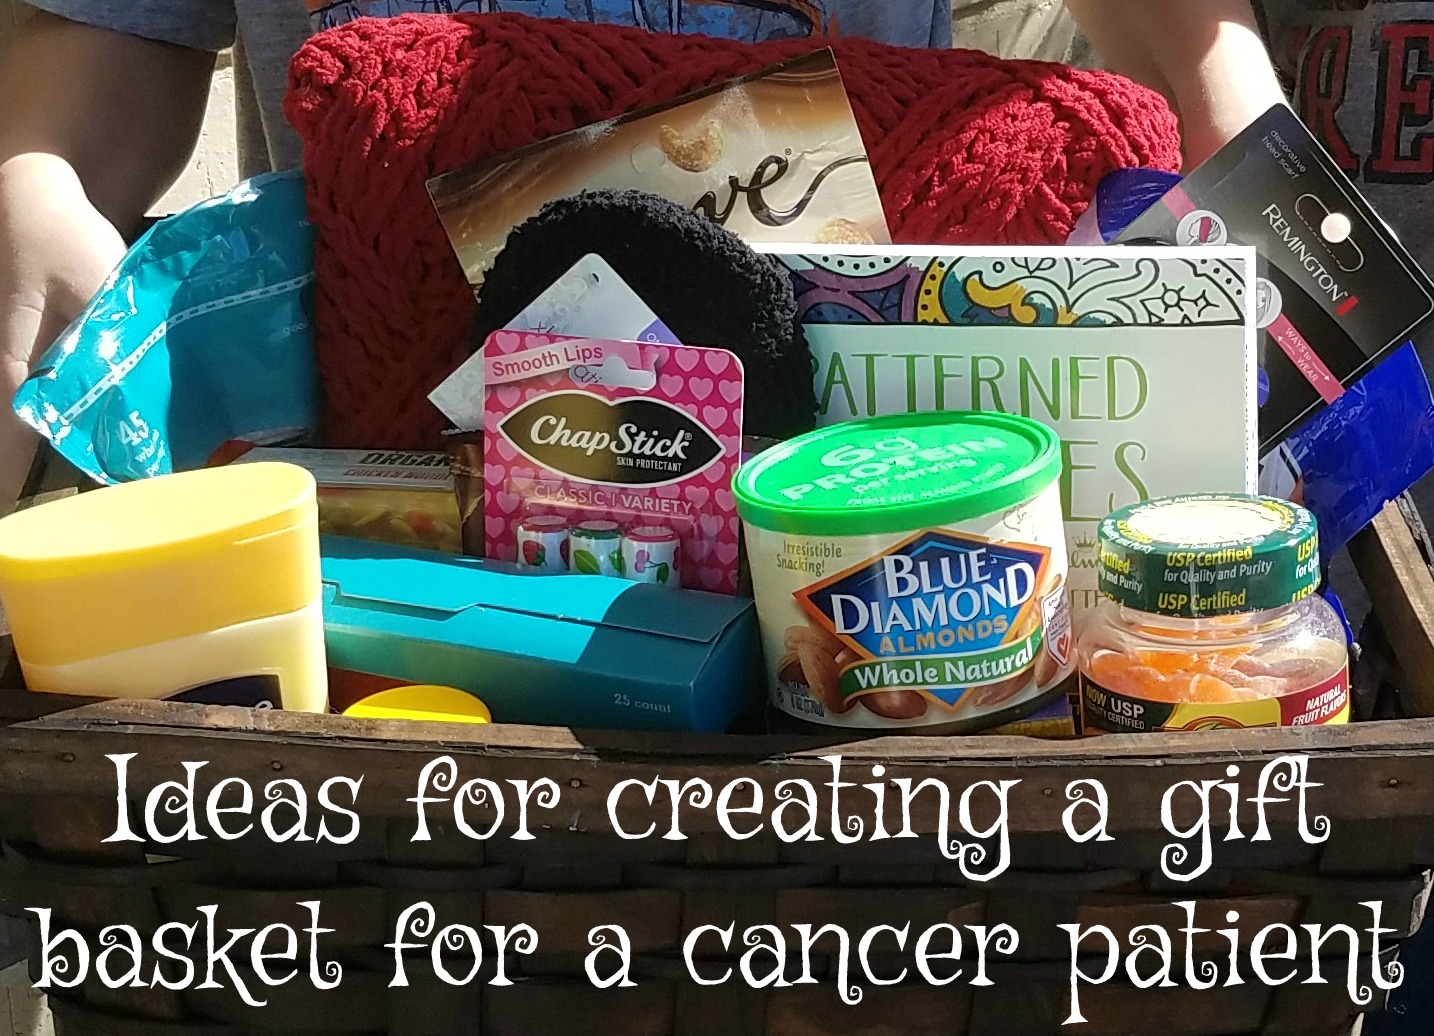 How To Create A Gift Basket For Cancer Patient